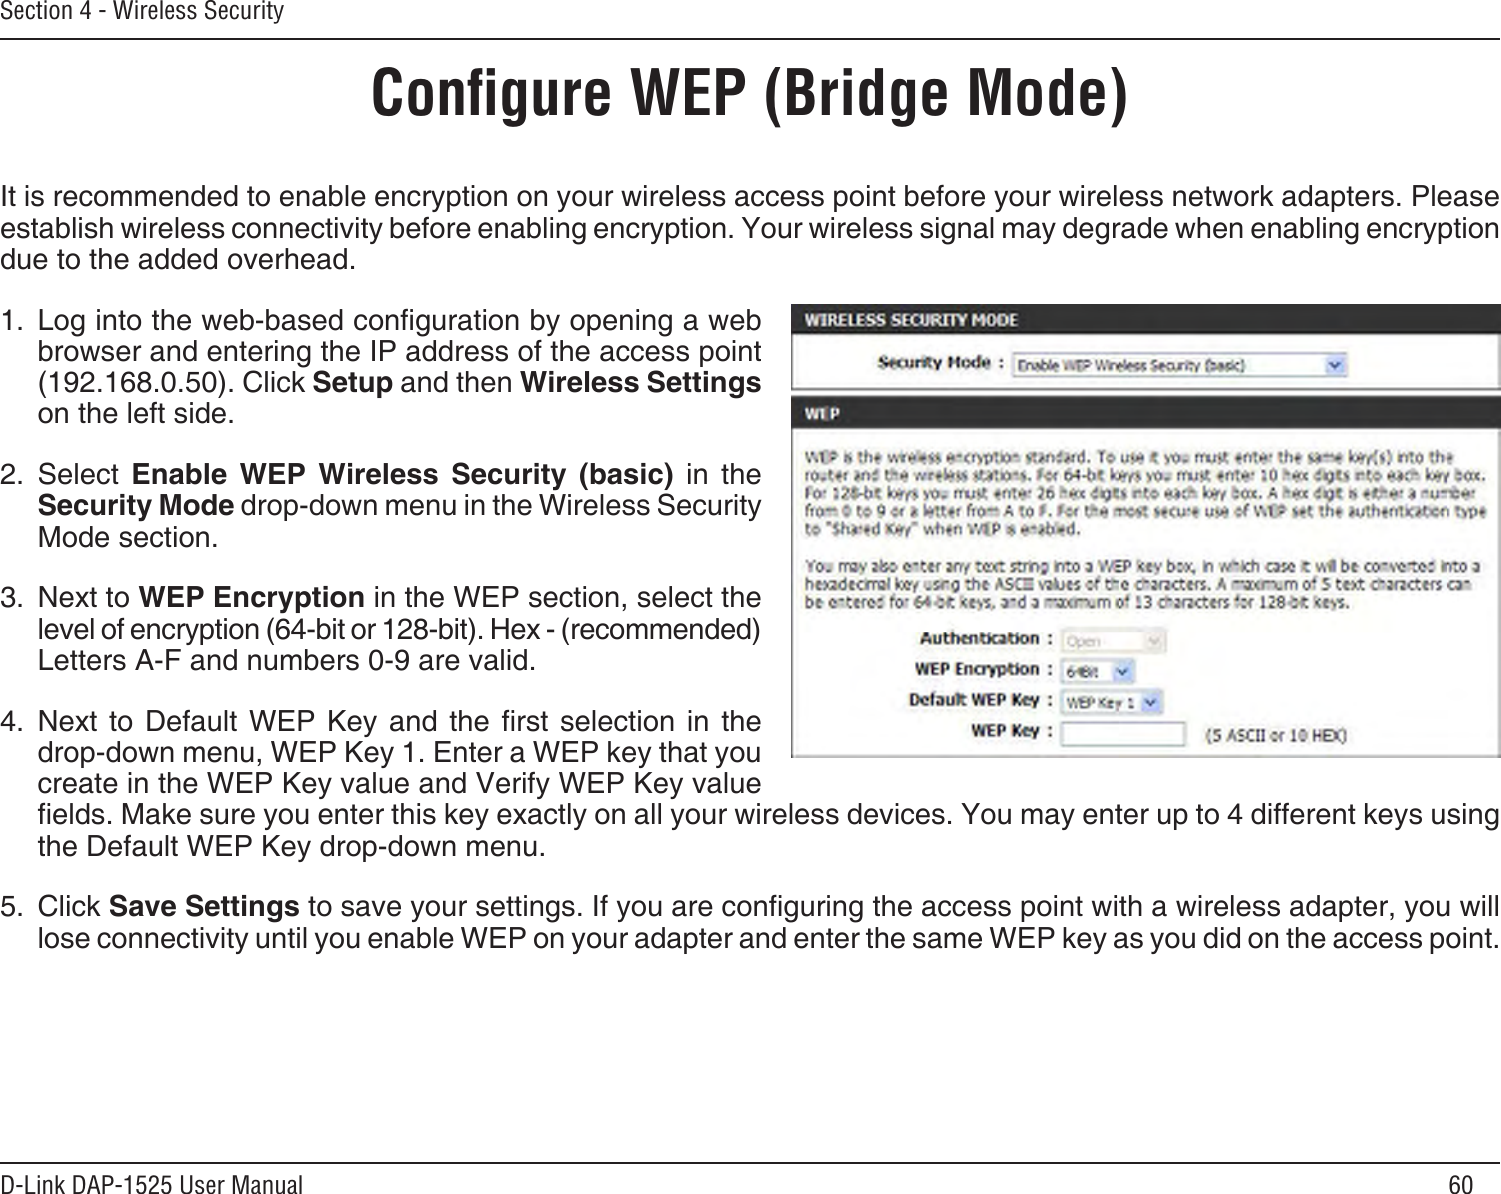 60D-Link DAP-1525 User ManualSection 4 - Wireless SecurityConﬁgure WEP (Bridge Mode)It is recommended to enable encryption on your wireless access point before your wireless network adapters. Please establish wireless connectivity before enabling encryption. Your wireless signal may degrade when enabling encryption due to the added overhead.1.  Log into the web-based conguration by opening a web browser and entering the IP address of the access point (192.168.0.50). Click Setup and then Wireless Settings on the left side.2.  Select  Enable  WEP  Wireless  Security  (basic)  in  the Security Mode drop-down menu in the Wireless Security Mode section.3.  Next to WEP Encryption in the WEP section, select the level of encryption (64-bit or 128-bit). Hex - (recommended) Letters A-F and numbers 0-9 are valid.4.  Next  to  Default  WEP  Key  and  the  rst  selection  in  the drop-down menu, WEP Key 1. Enter a WEP key that you create in the WEP Key value and Verify WEP Key value elds. Make sure you enter this key exactly on all your wireless devices. You may enter up to 4 different keys using the Default WEP Key drop-down menu.5.  Click Save Settings to save your settings. If you are conguring the access point with a wireless adapter, you will lose connectivity until you enable WEP on your adapter and enter the same WEP key as you did on the access point.